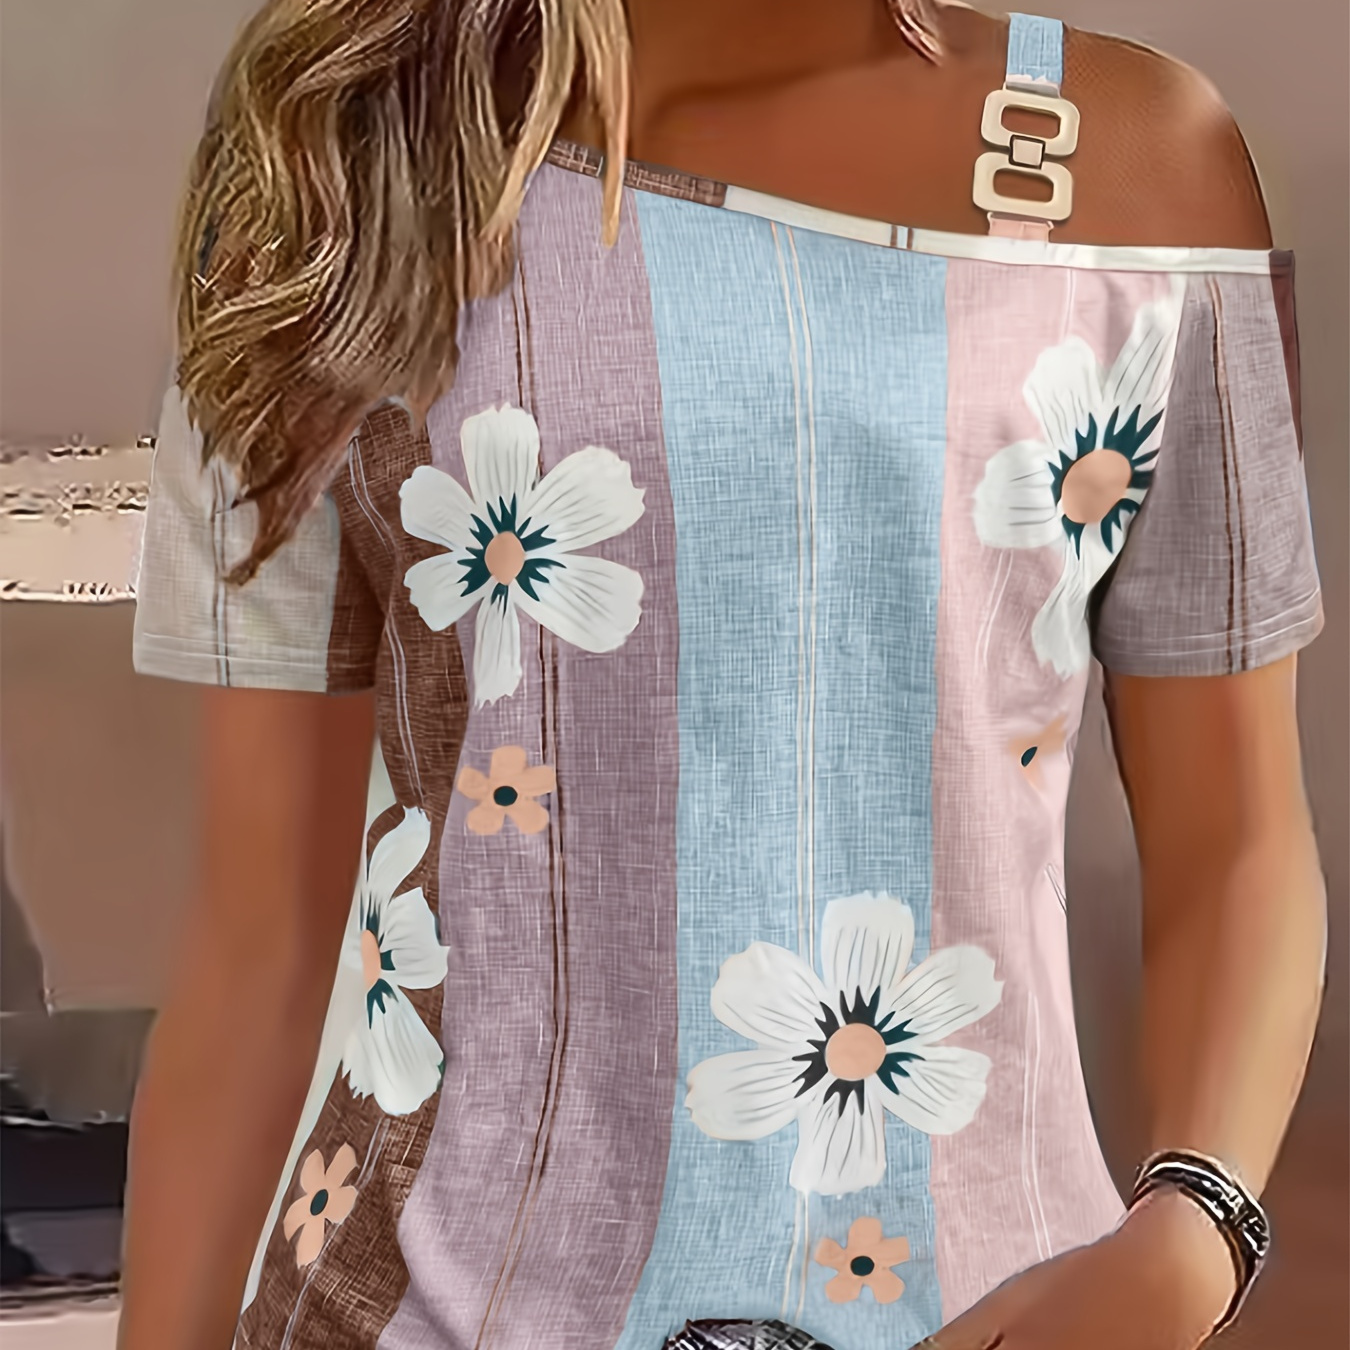 

Floral Print Chain Strap T-shirt, Casual Asymmetrical Neck Cold Shoulder Short Sleeve Top For Spring & Summer, Women's Clothing